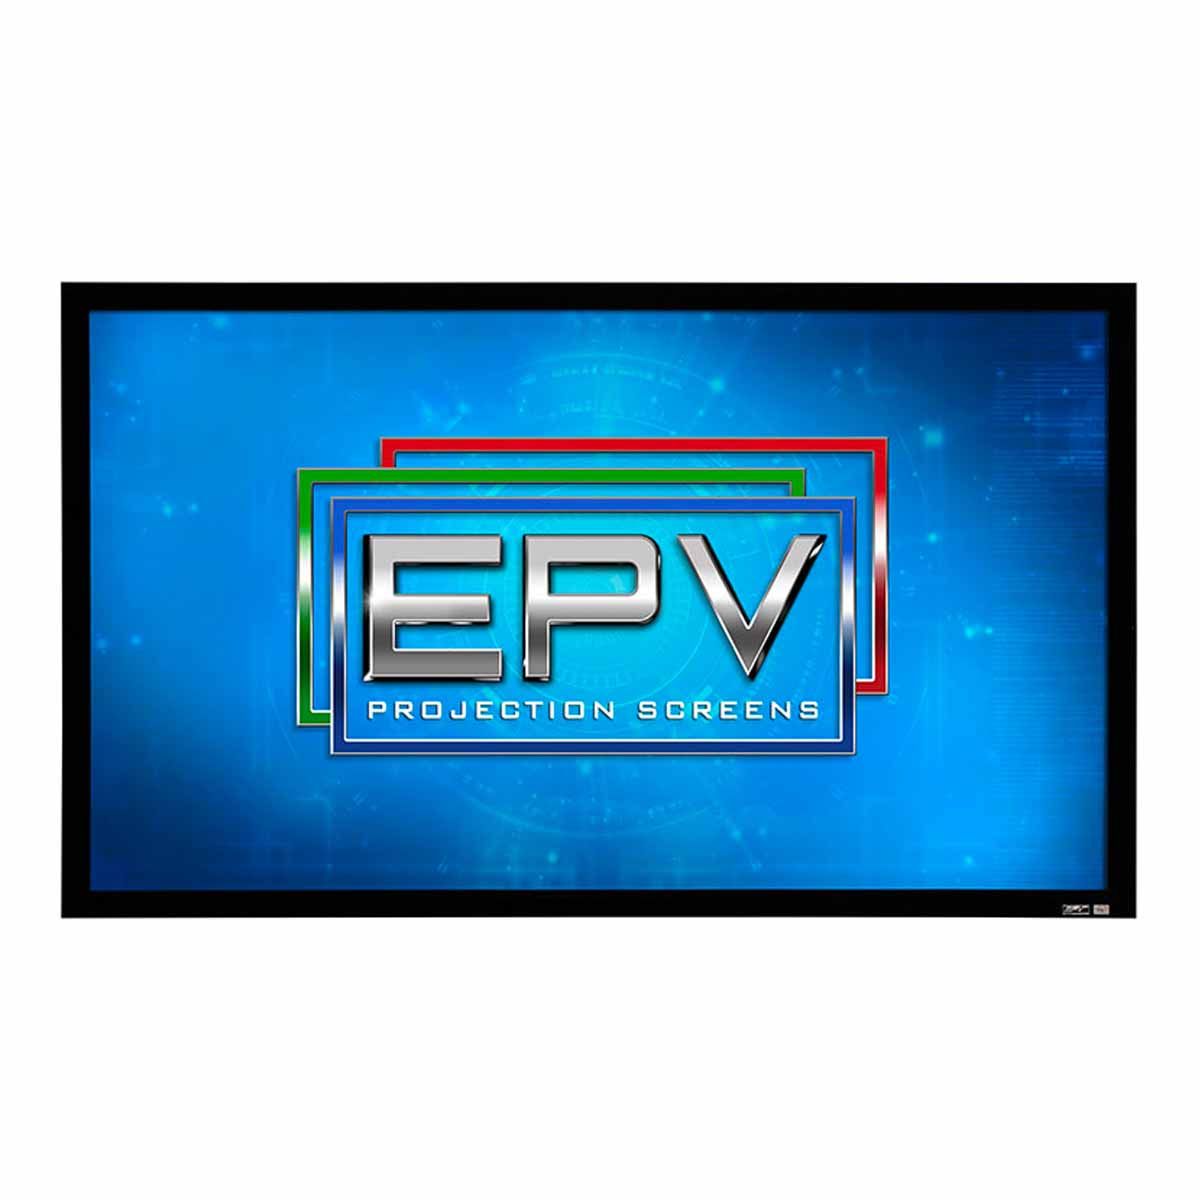 EPV Prime Vision ISF 3 Projector Screen front view with image of EPV logo